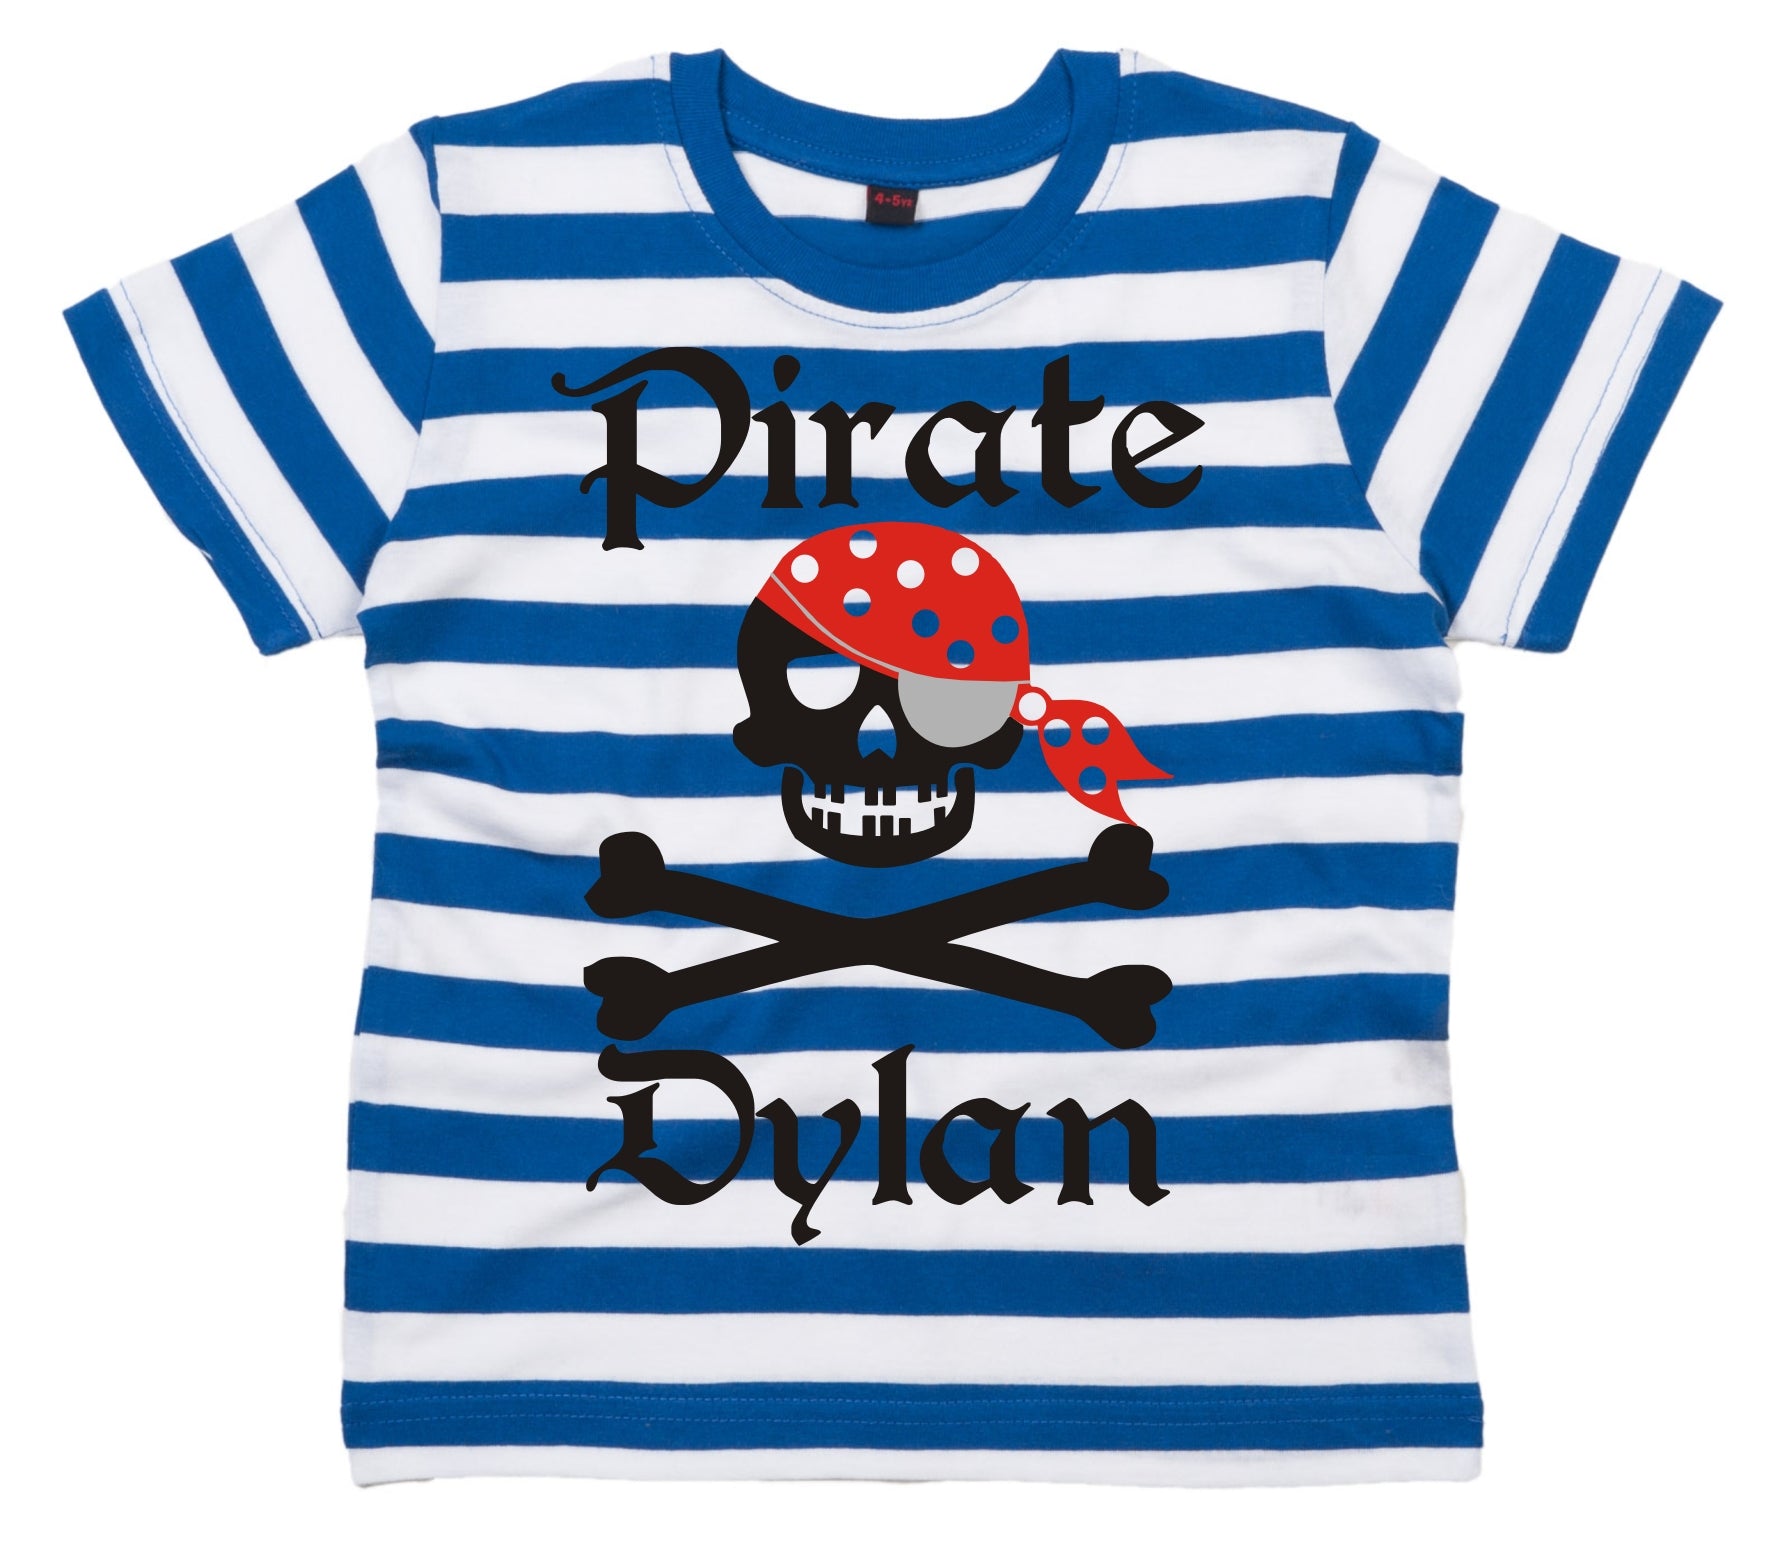 Blue & White Striped Personalised Children's T-Shirt 'Pirate Skull and Cross Bones' with Black, Red & Silver Print